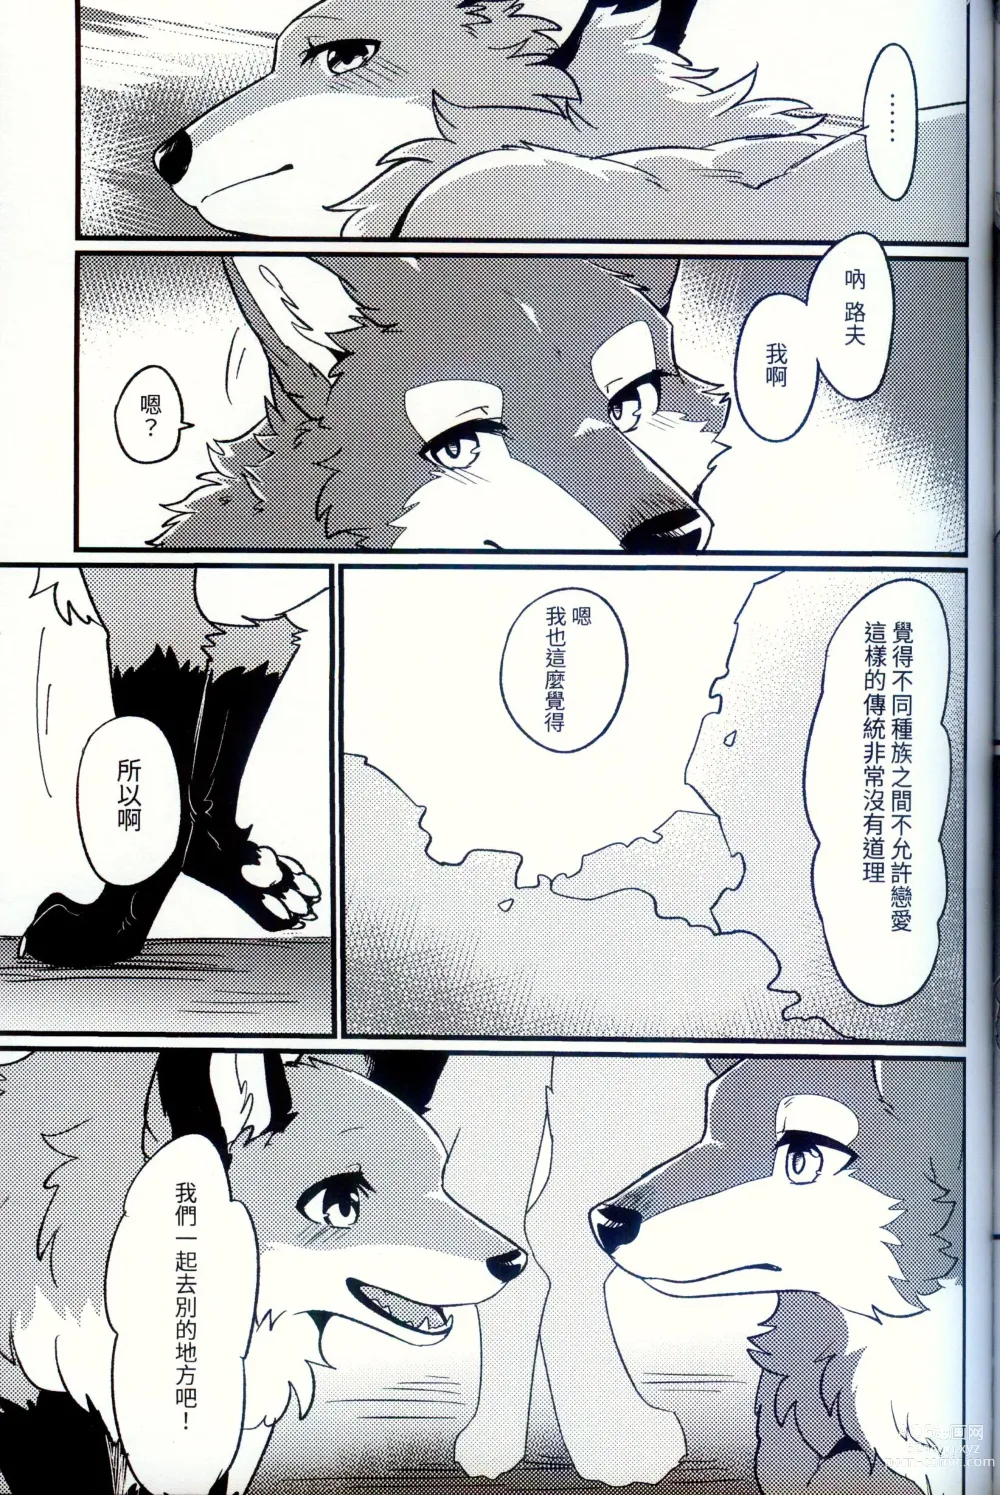 Page 15 of doujinshi IN THE FOREST (decensored)